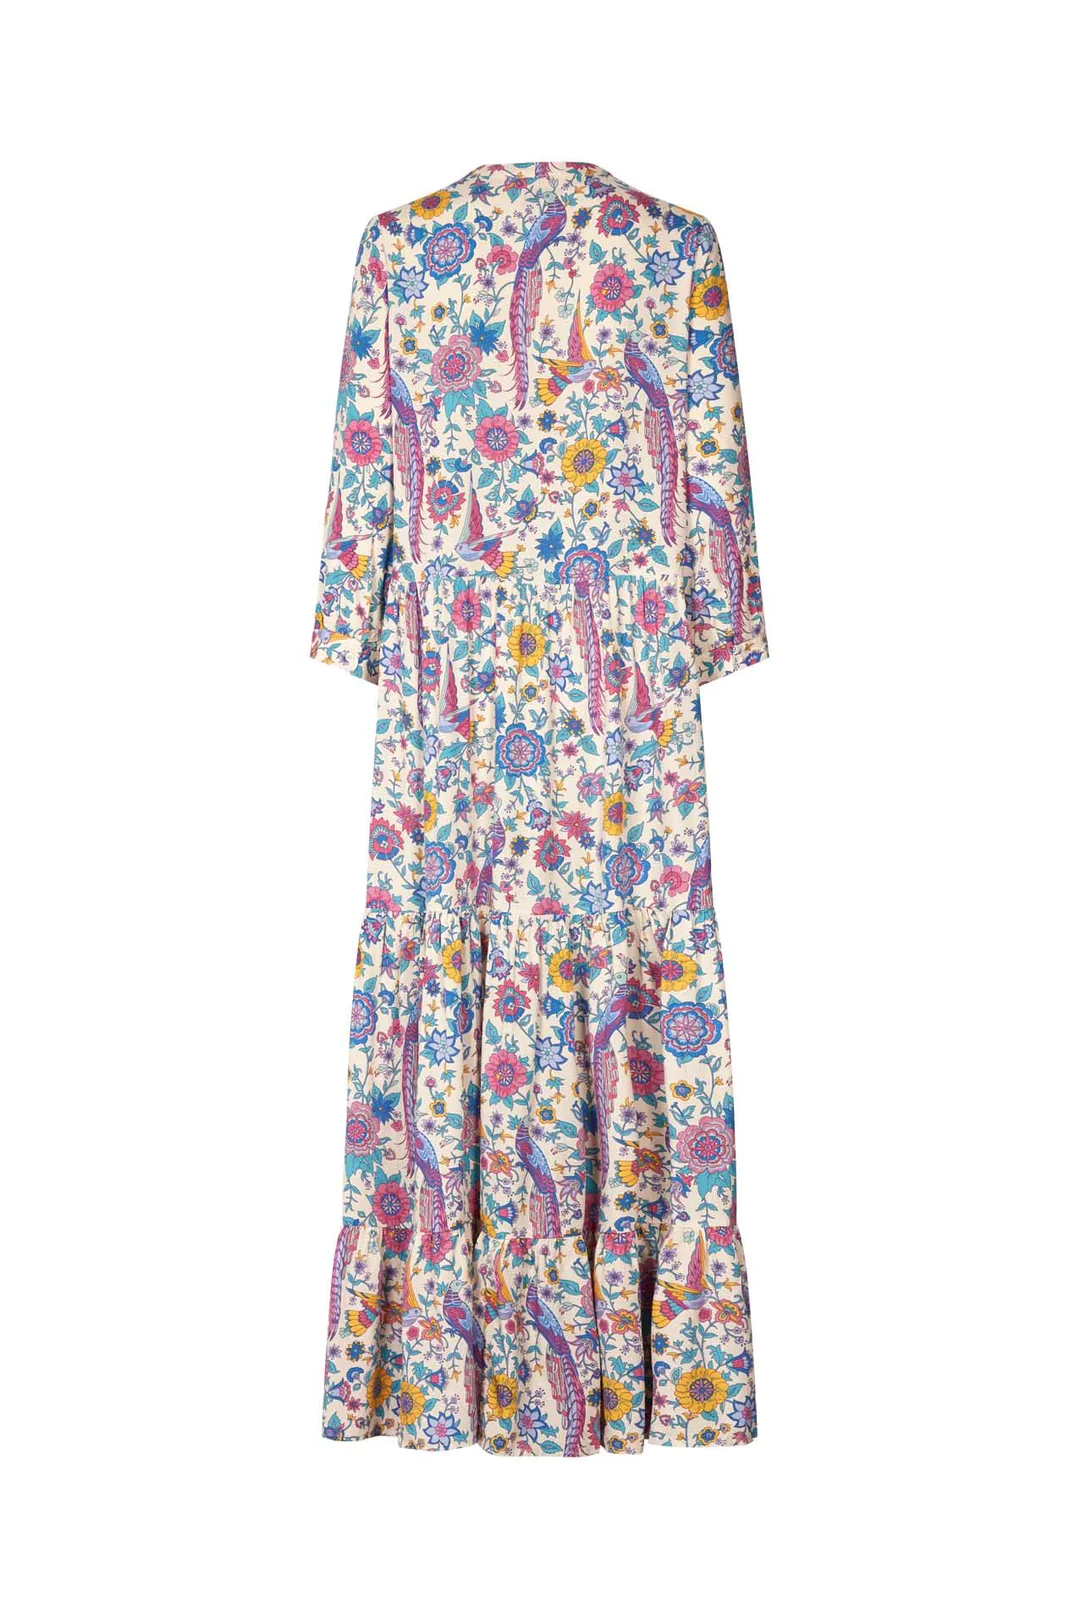 Lollys Laundry Nee Dress - Multi – Flying With Birds